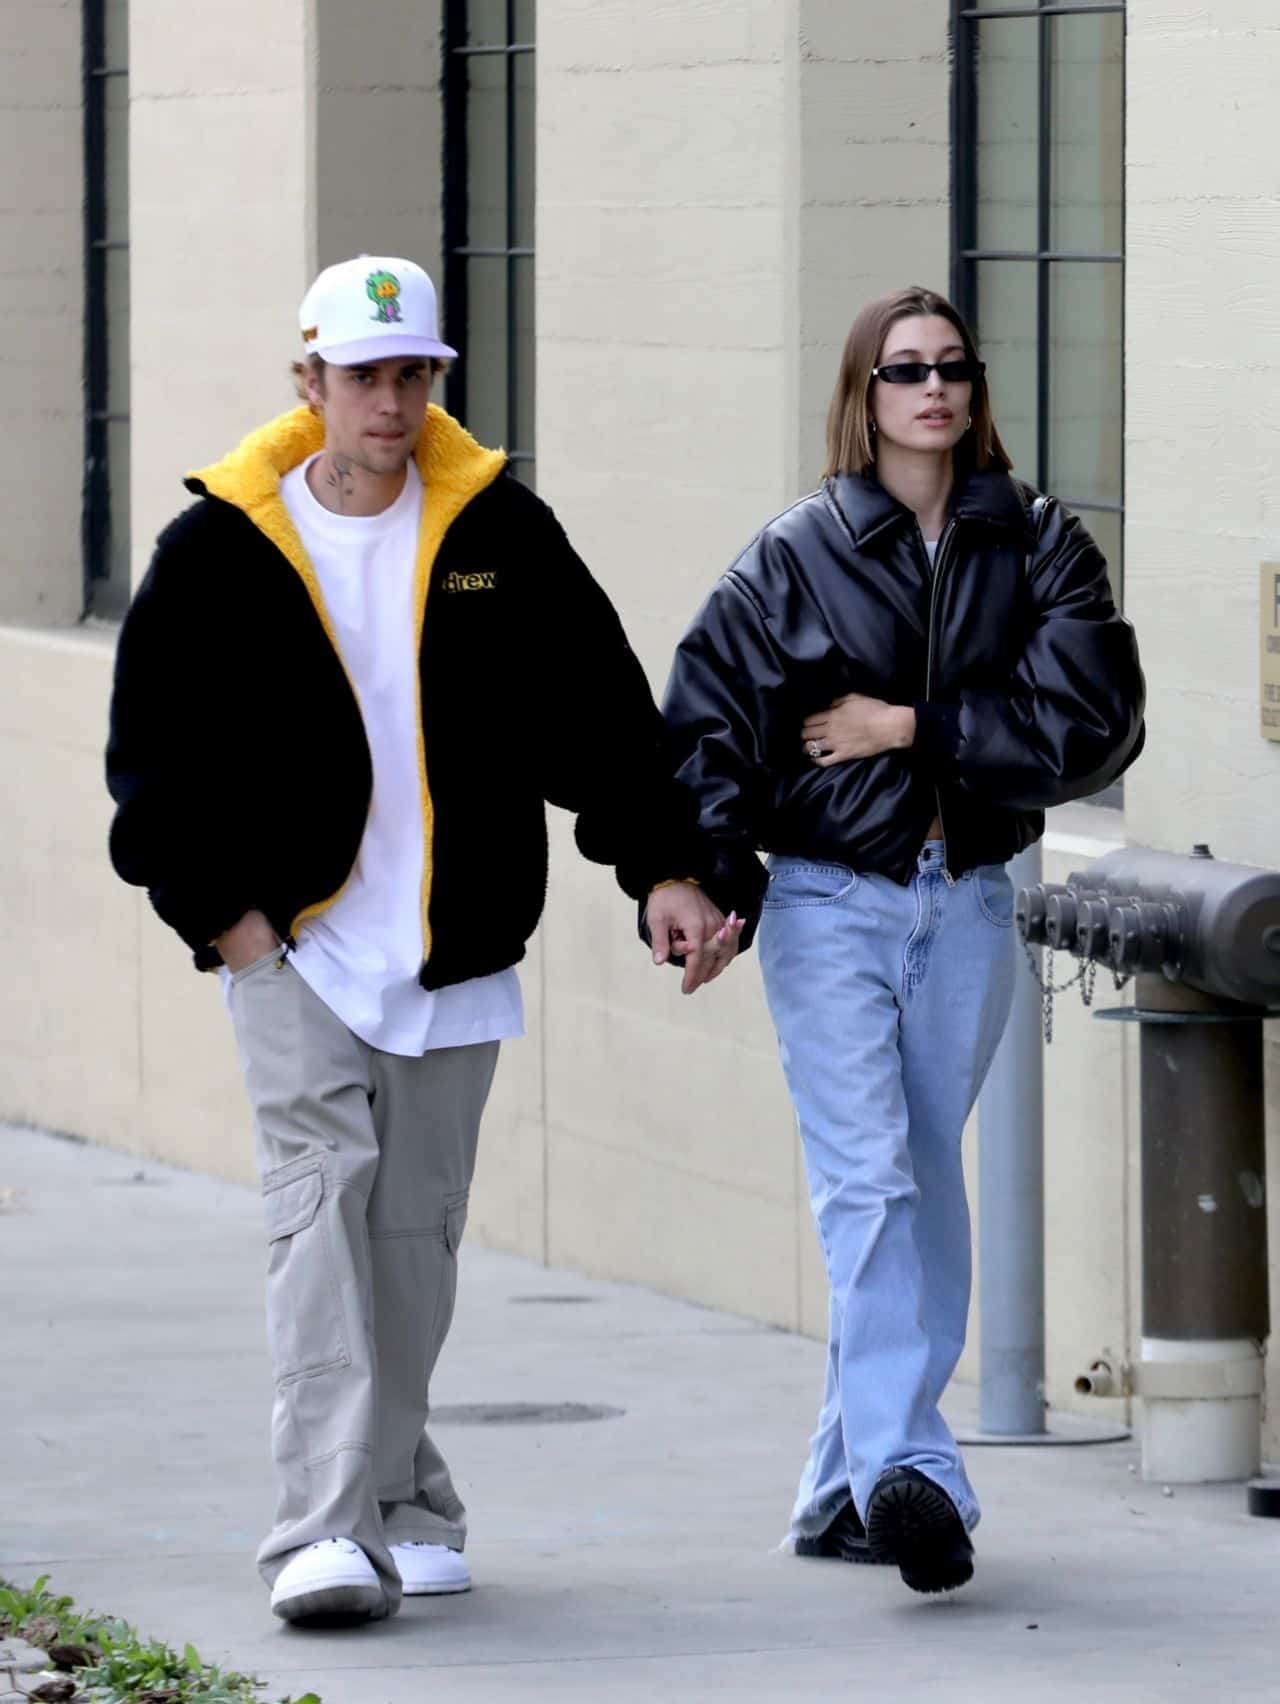 Hailey Bieber Rocks Casual yet Stylish Outfit on Leisurely Day Out with Justin